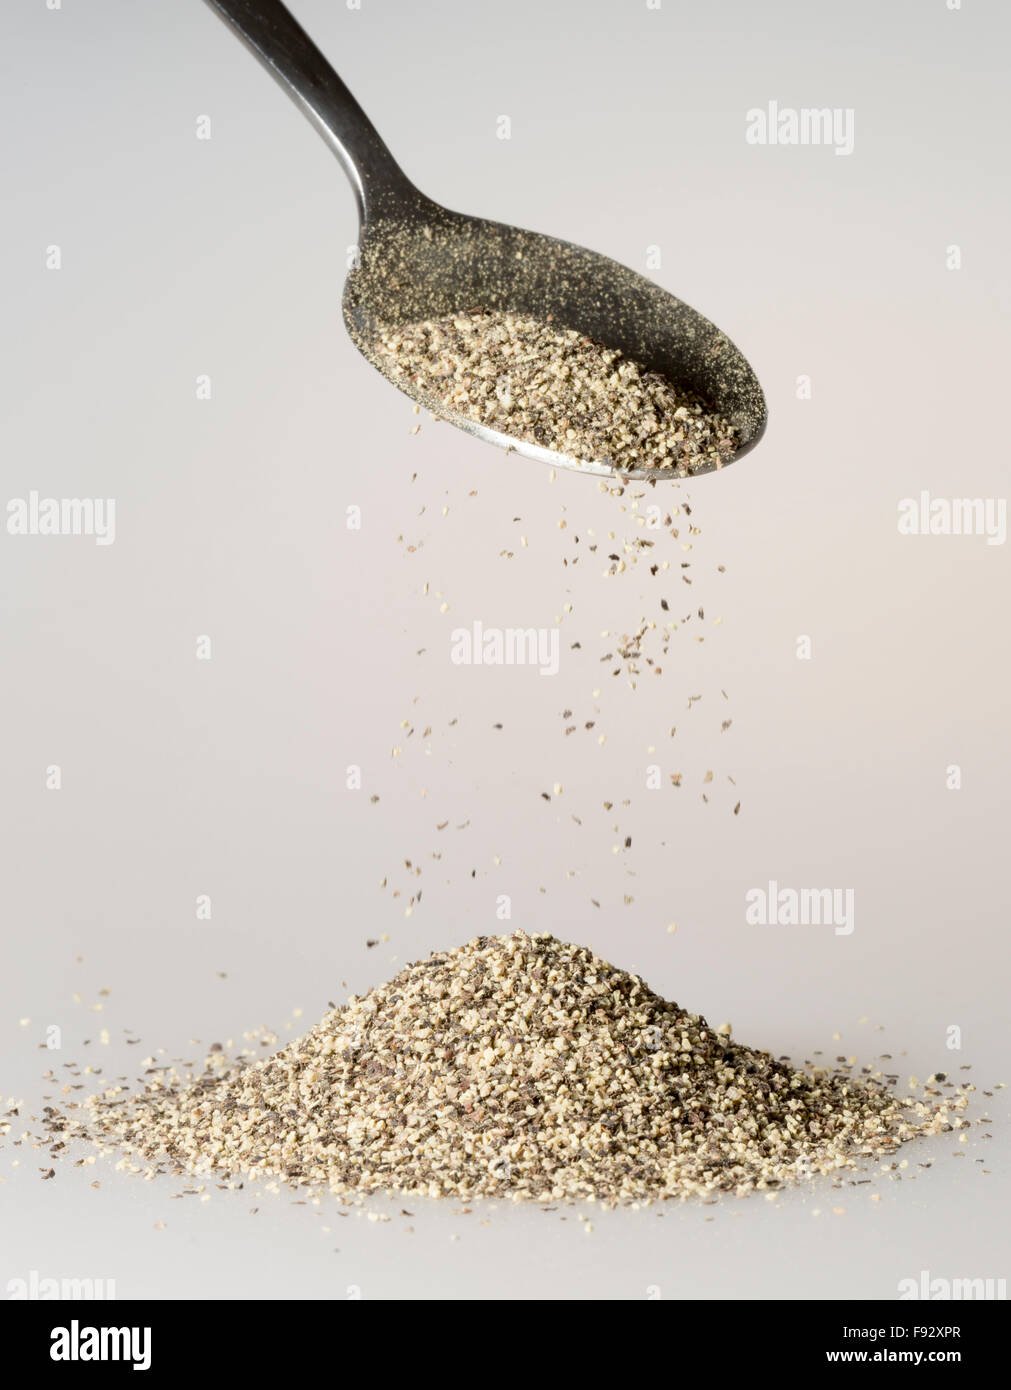 Black Pepper Falling from tablespoon Stock Photo